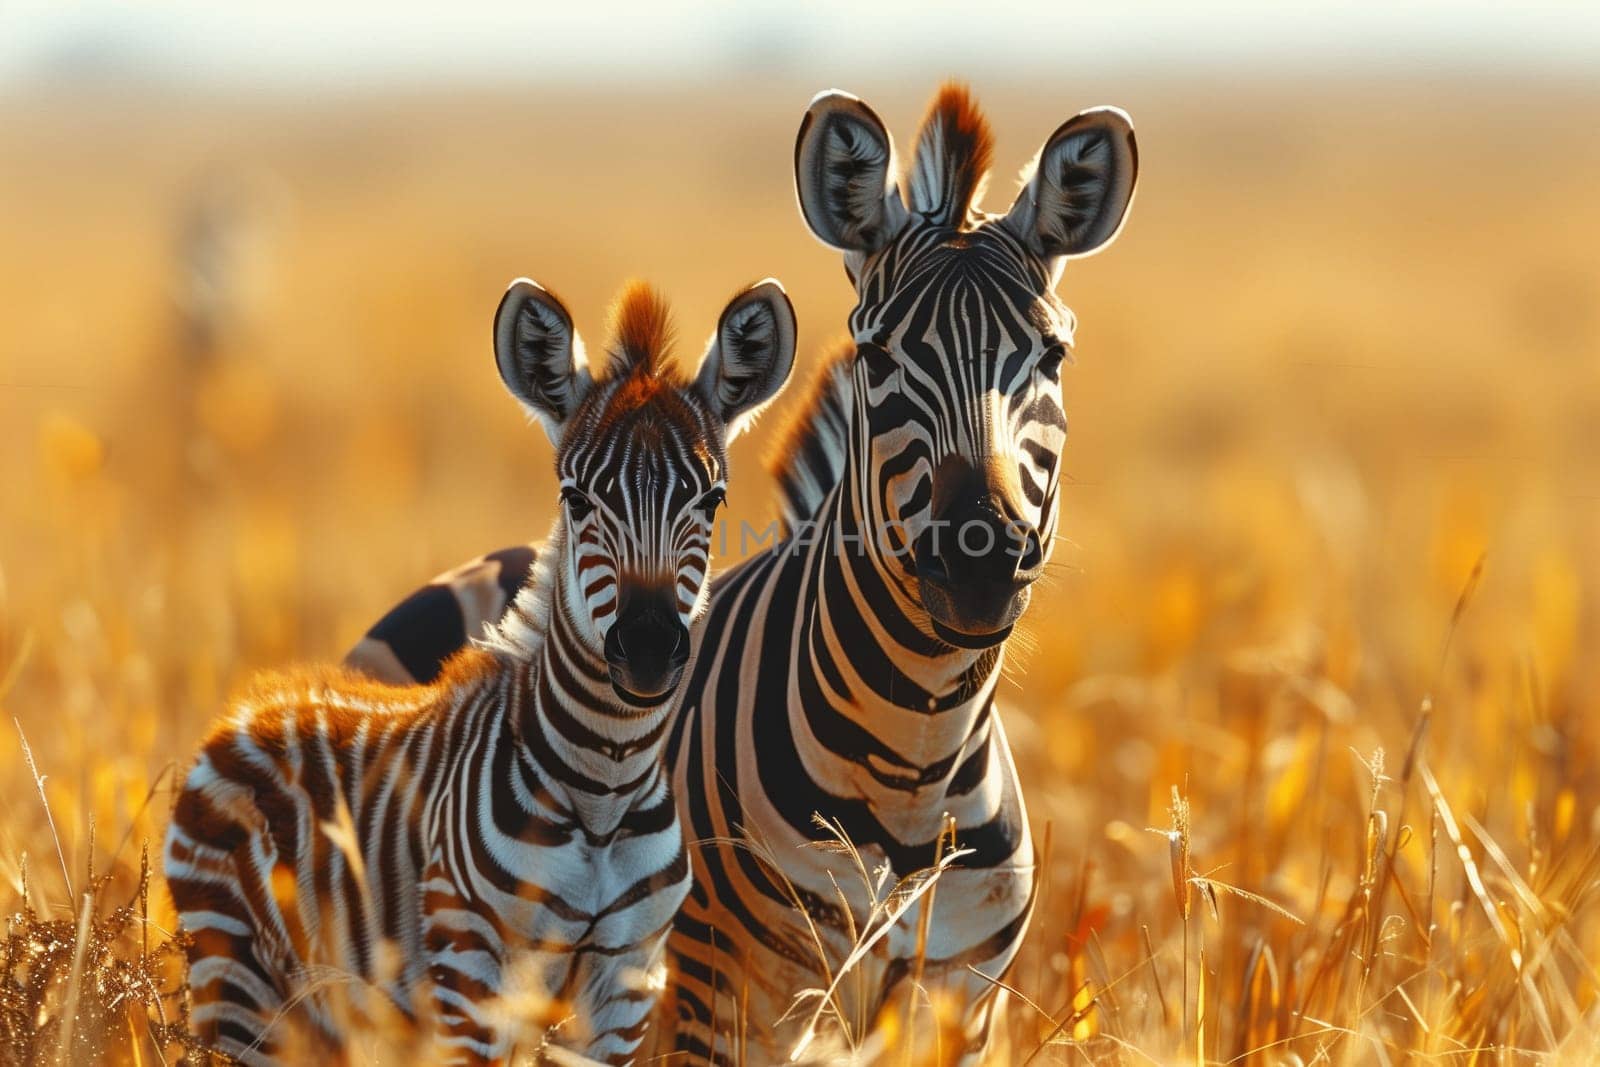 Two zebras photographed in a grassy ecoregion field by richwolf